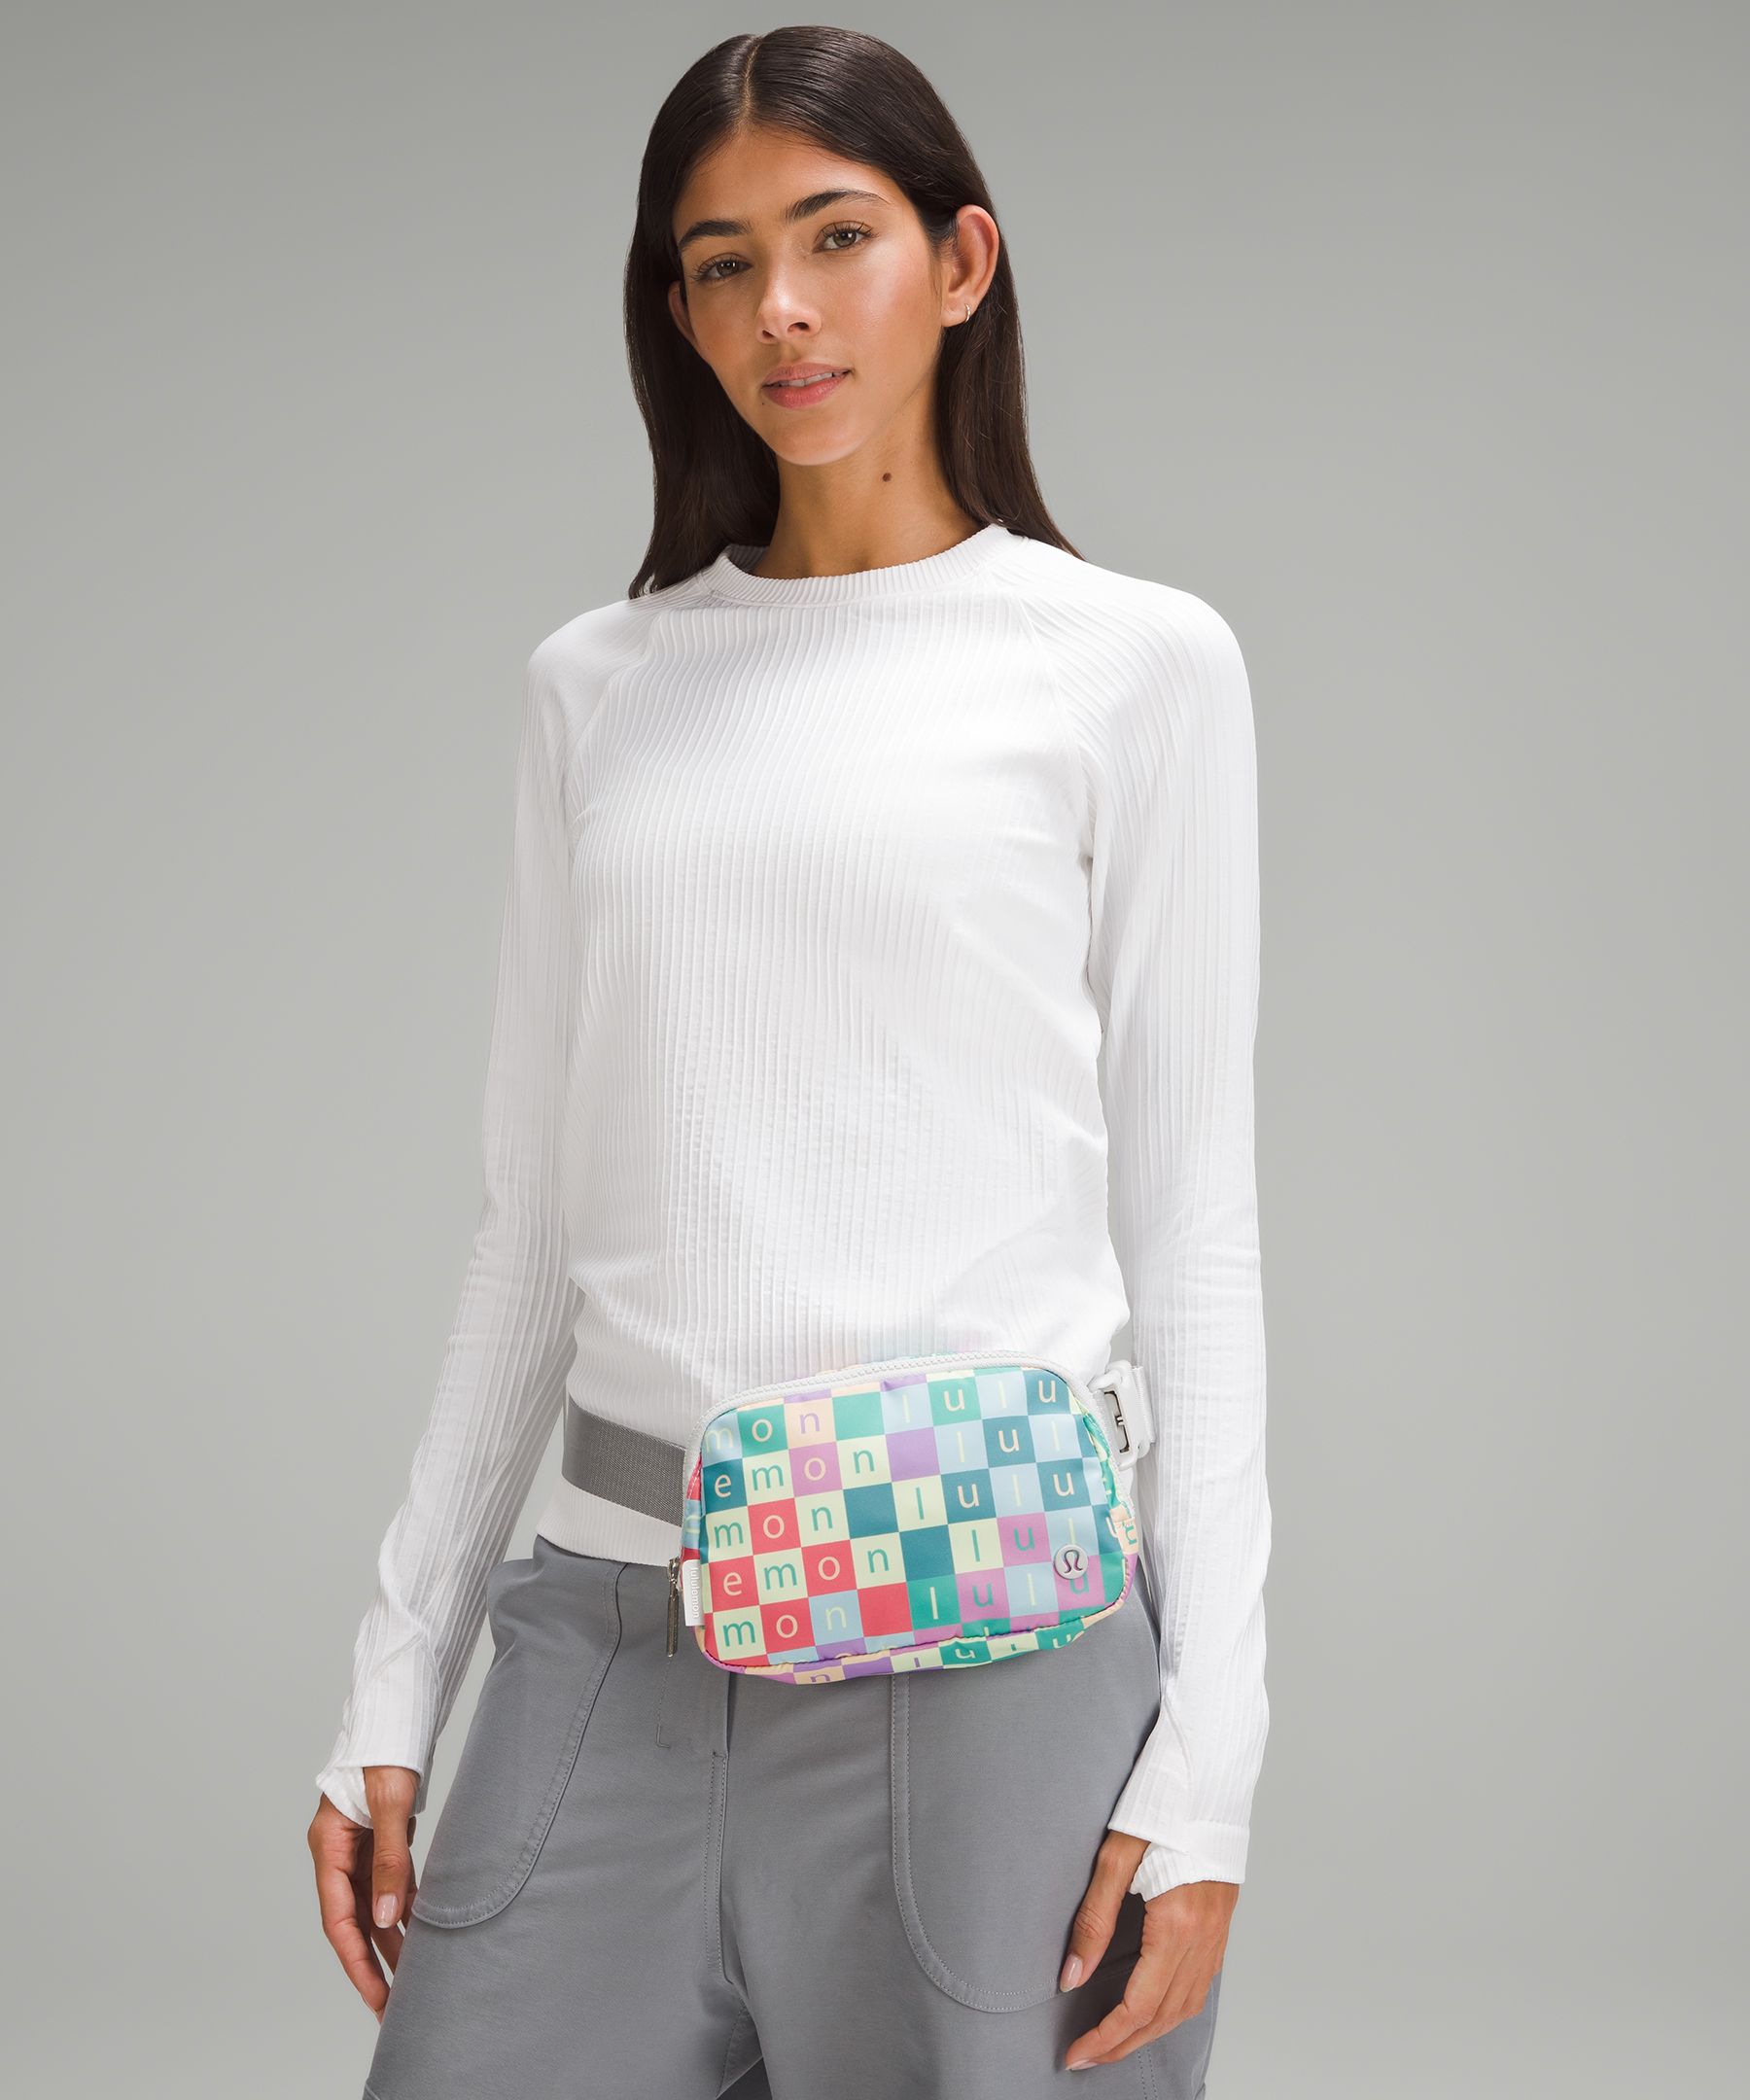 fanny packs are back, whether you like it or not